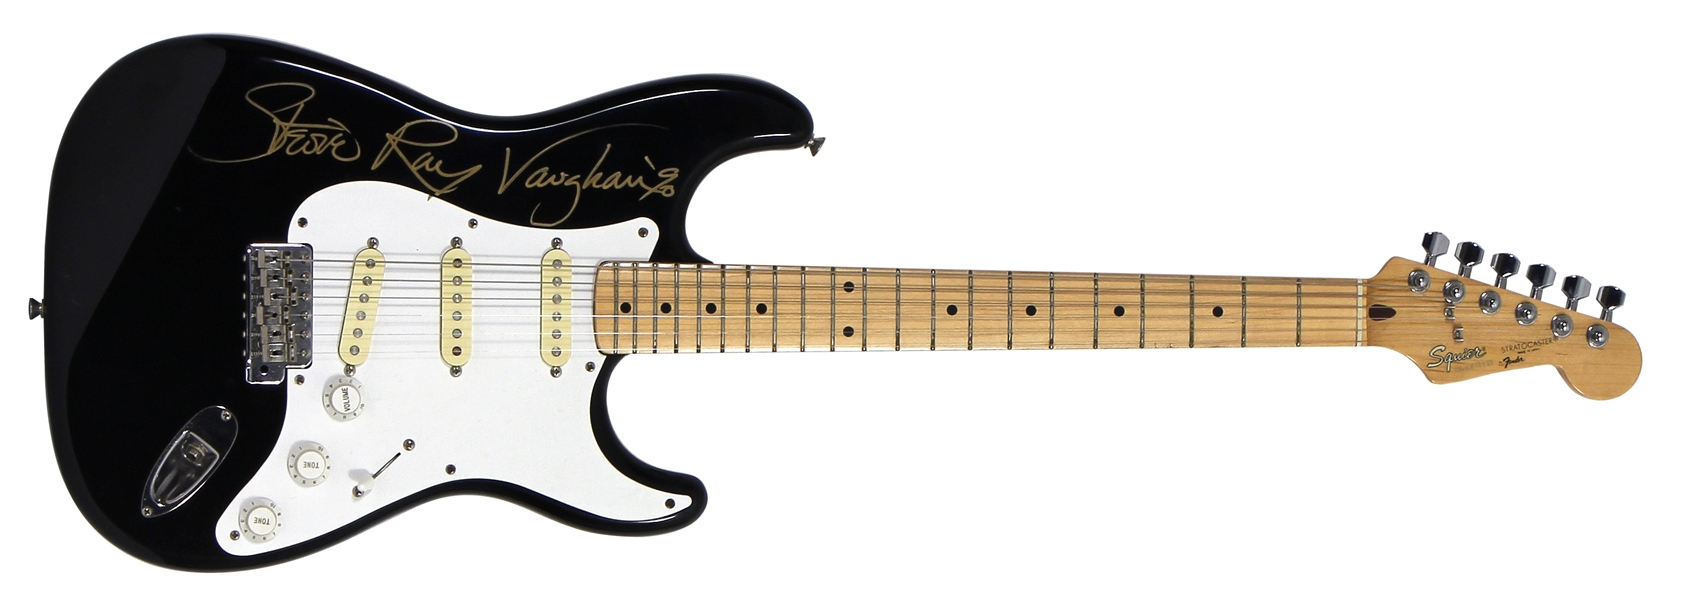 Stevie Ray Vaughan Played & Signed Black Fender Squier Guitar (REAL)